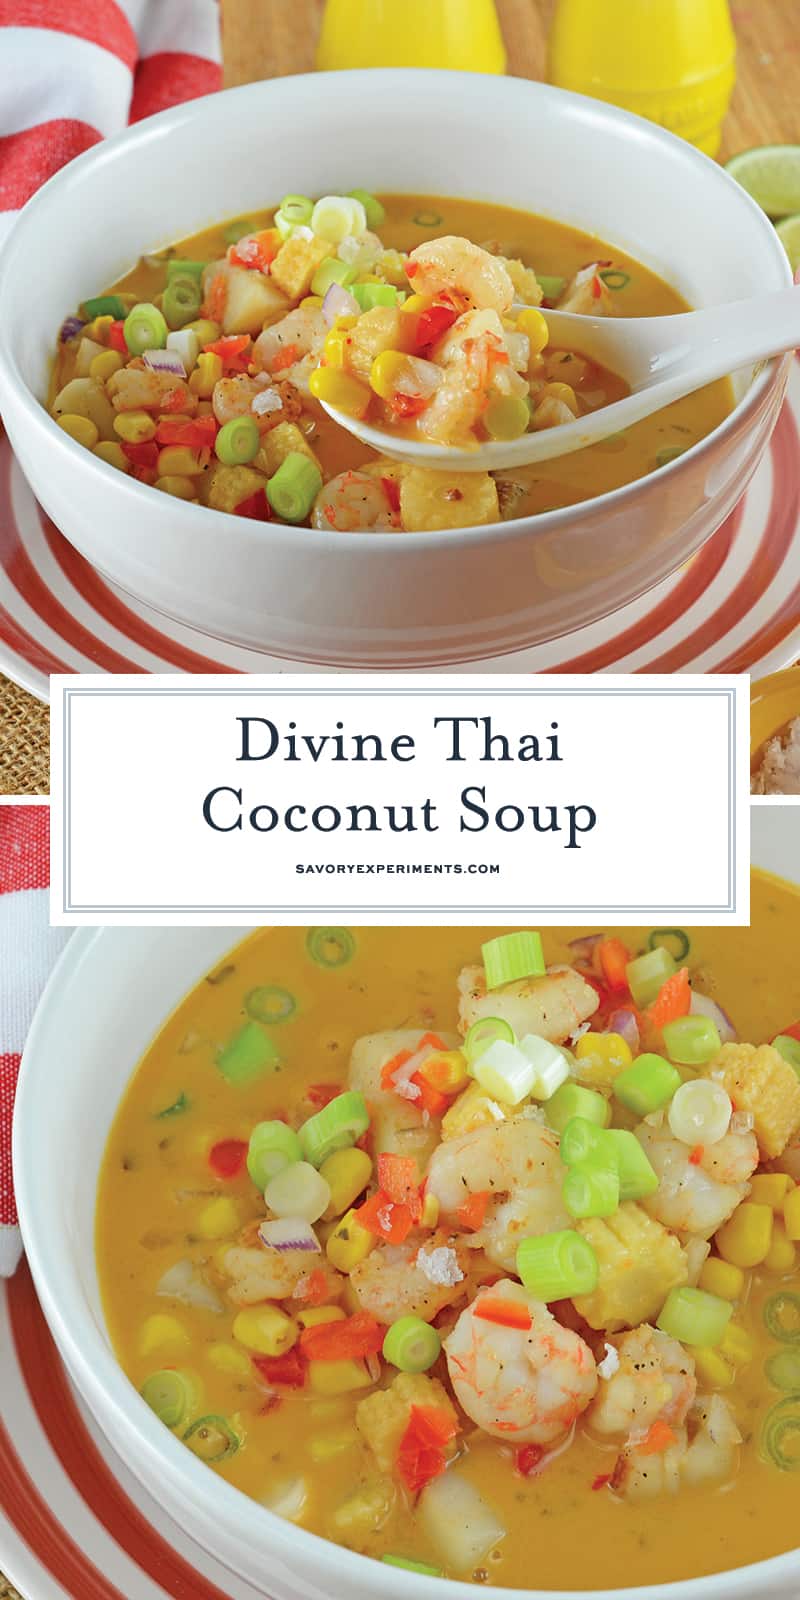 Thai Coconut Soup is an easy and healthy appetizer or entree using scallops, shrimp, vegetables and a red curry coconut broth. #thaicoconutsoup #thaiseafoodsoup www.savoryexperiments.com